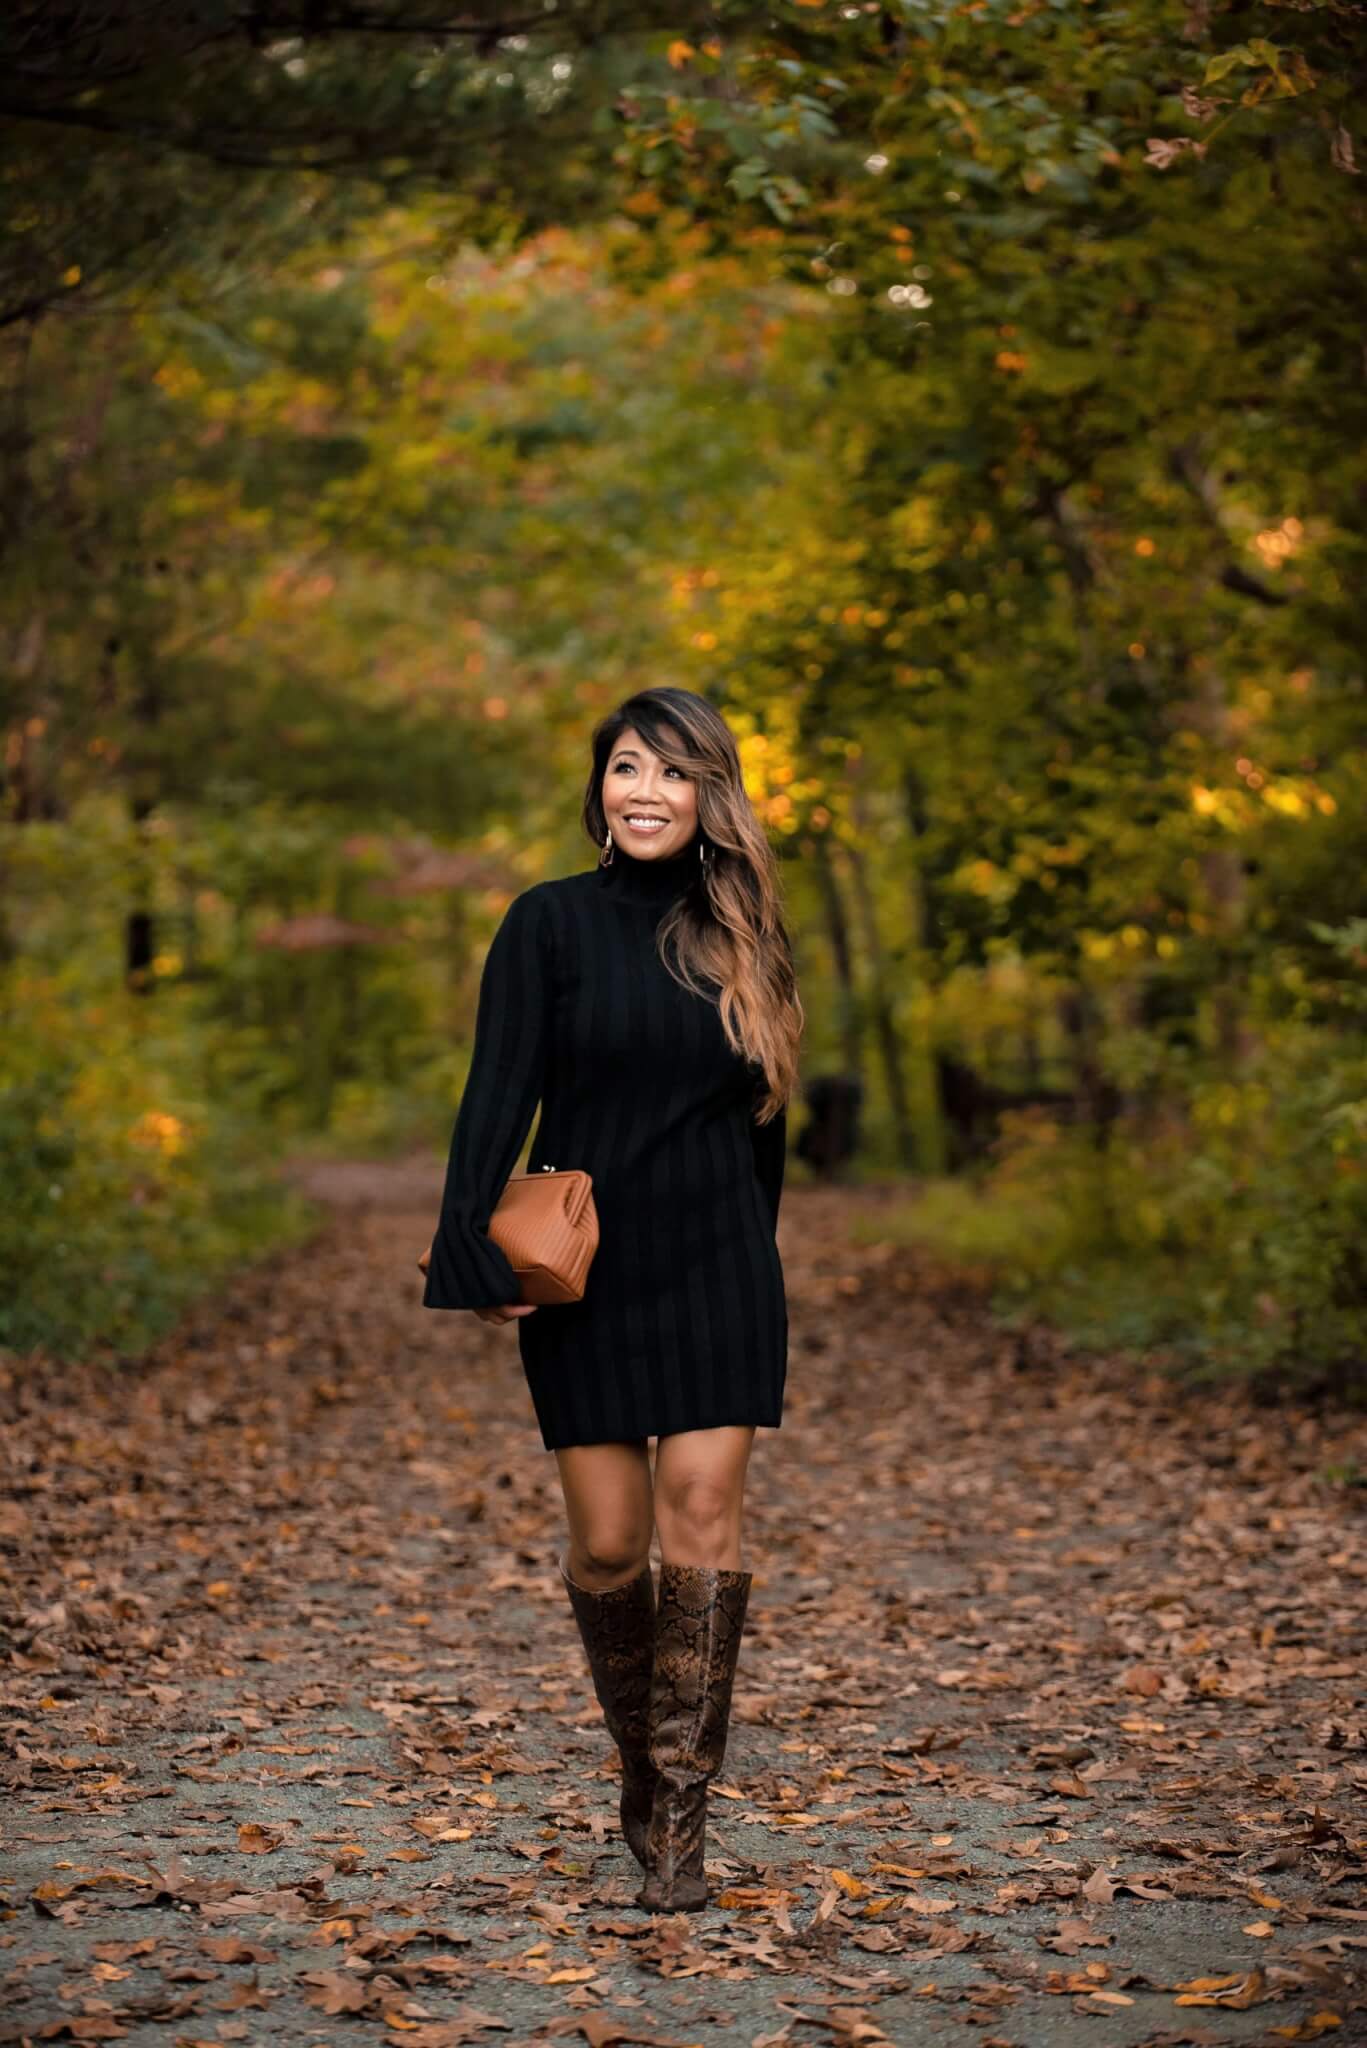 lady with long dark hair in black sweater dress with snakeskin boots and brown clutch walking through the forest during fall